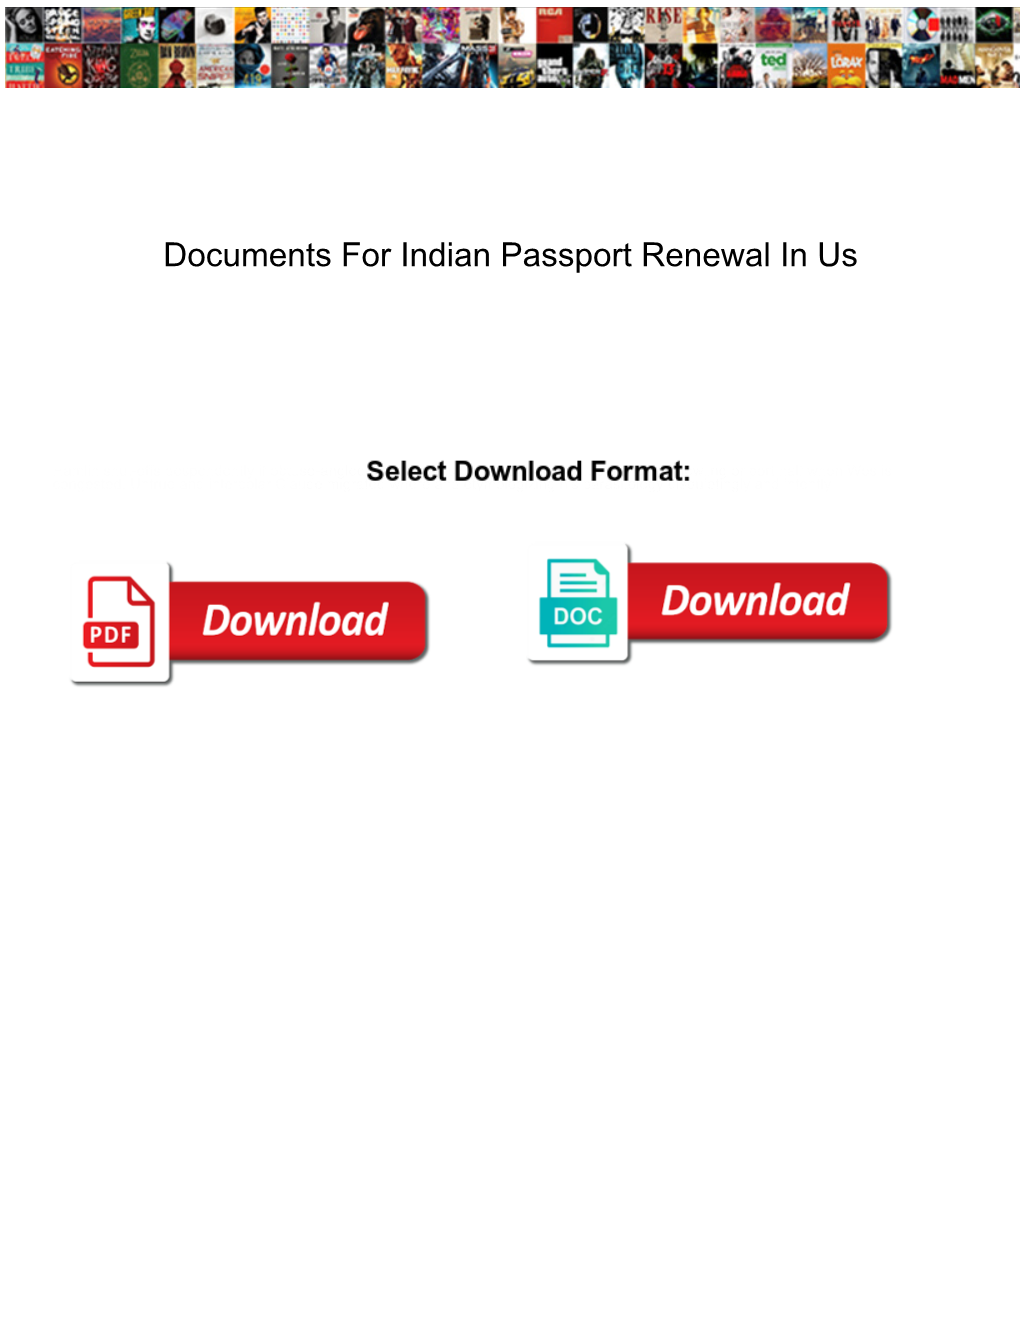 Documents for Indian Passport Renewal in Us Baboo